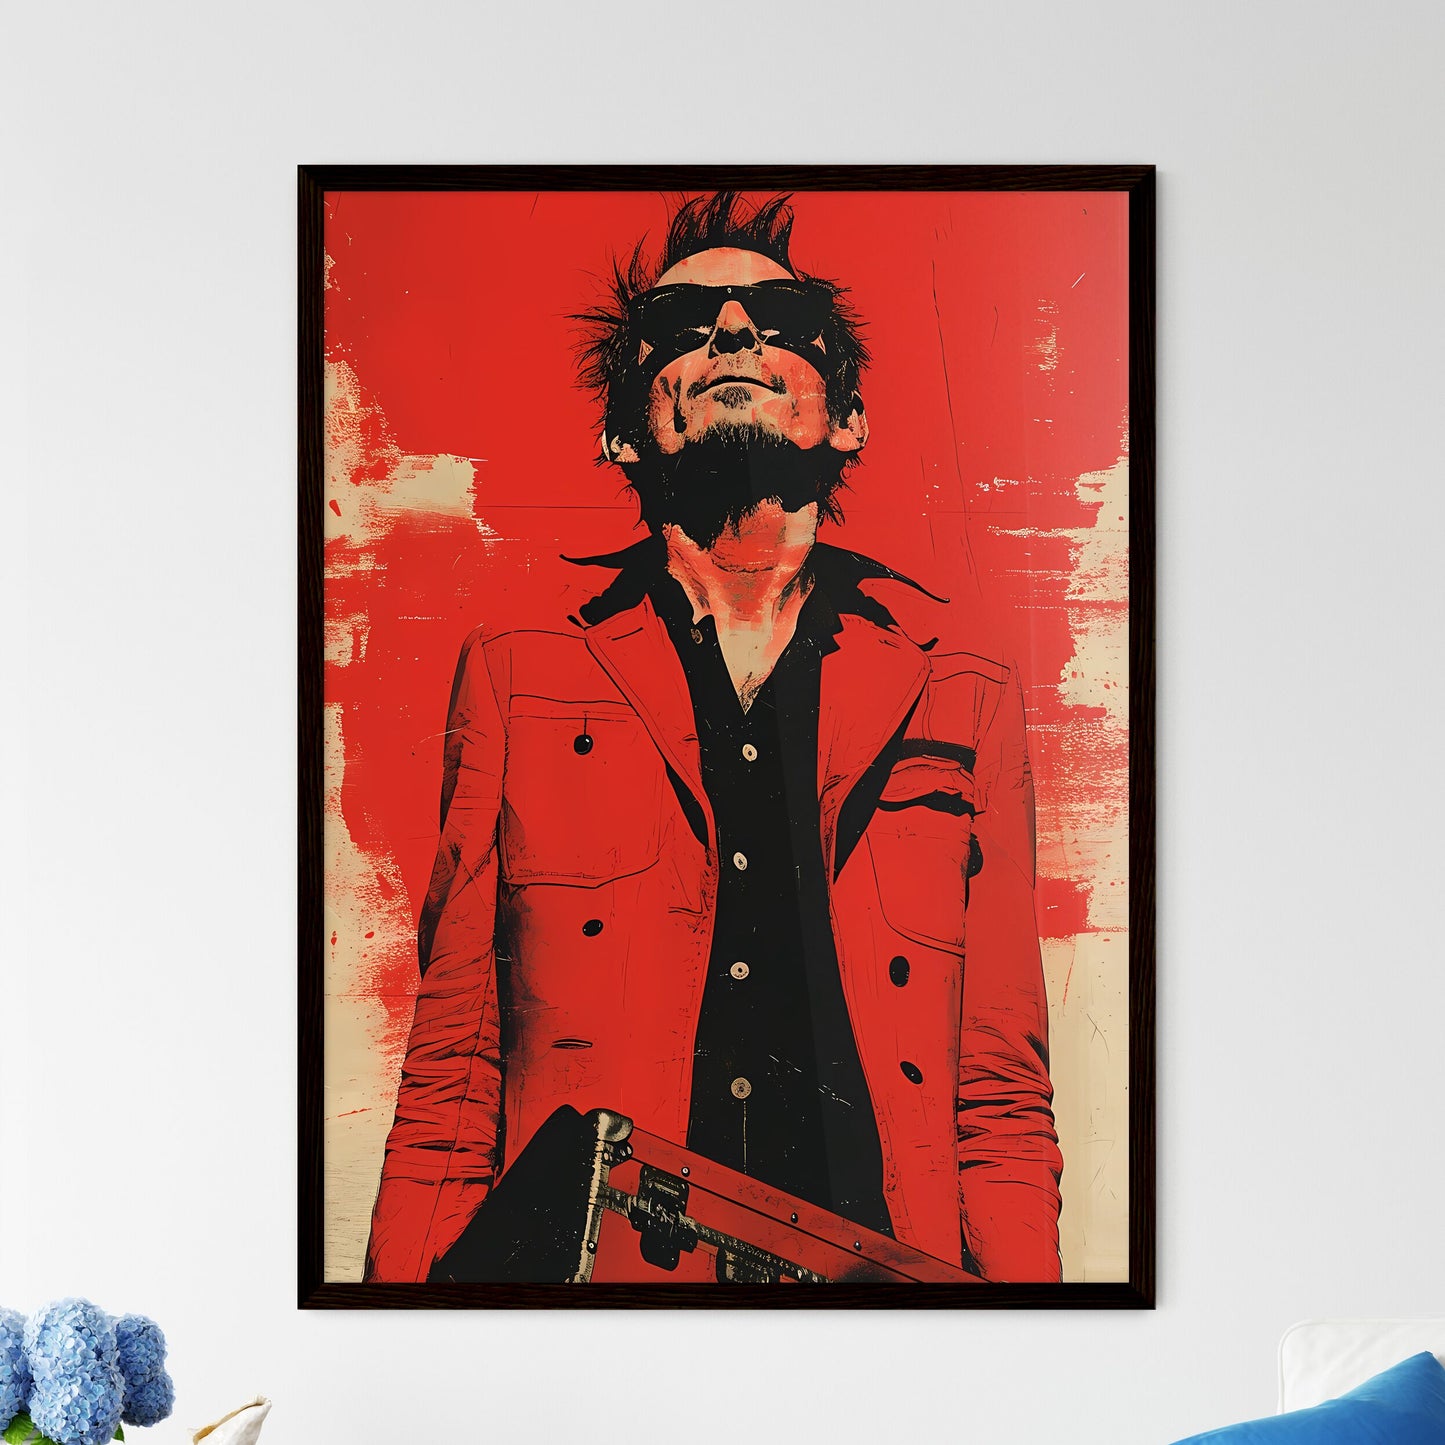 A trendy rocker guy with a pelican case - Art print of a man in sunglasses and a red jacket holding a gun Default Title